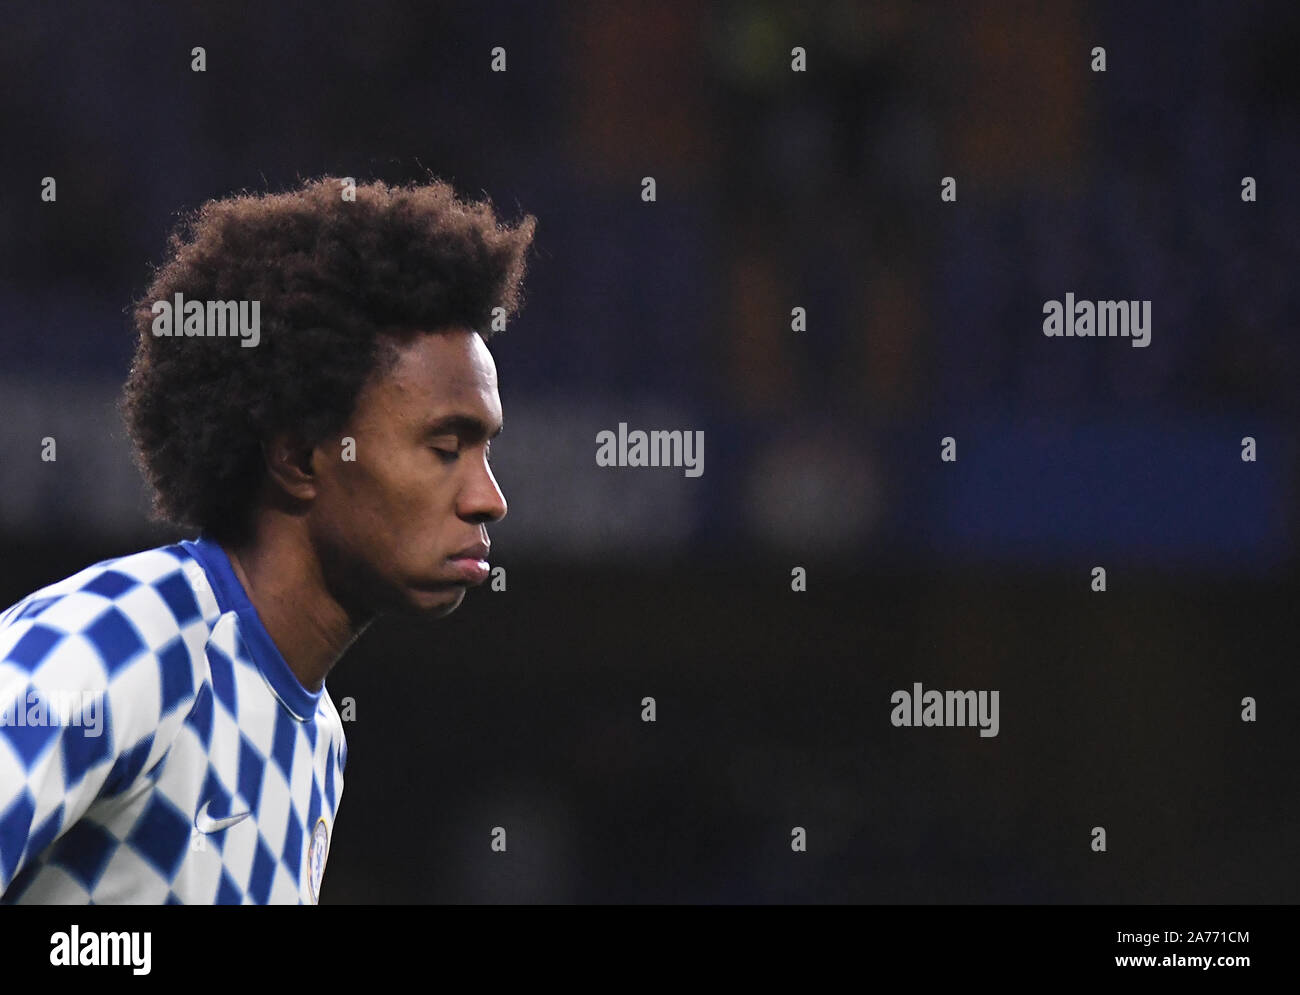 LONDON, ENGLAND - DECEMBER 8, 2018: Willian Borges da Silva of Chelsea pictured prior to the 2018/19 Premier League game between Chelsea FC and Manchester City at Stamford Bridge. Stock Photo